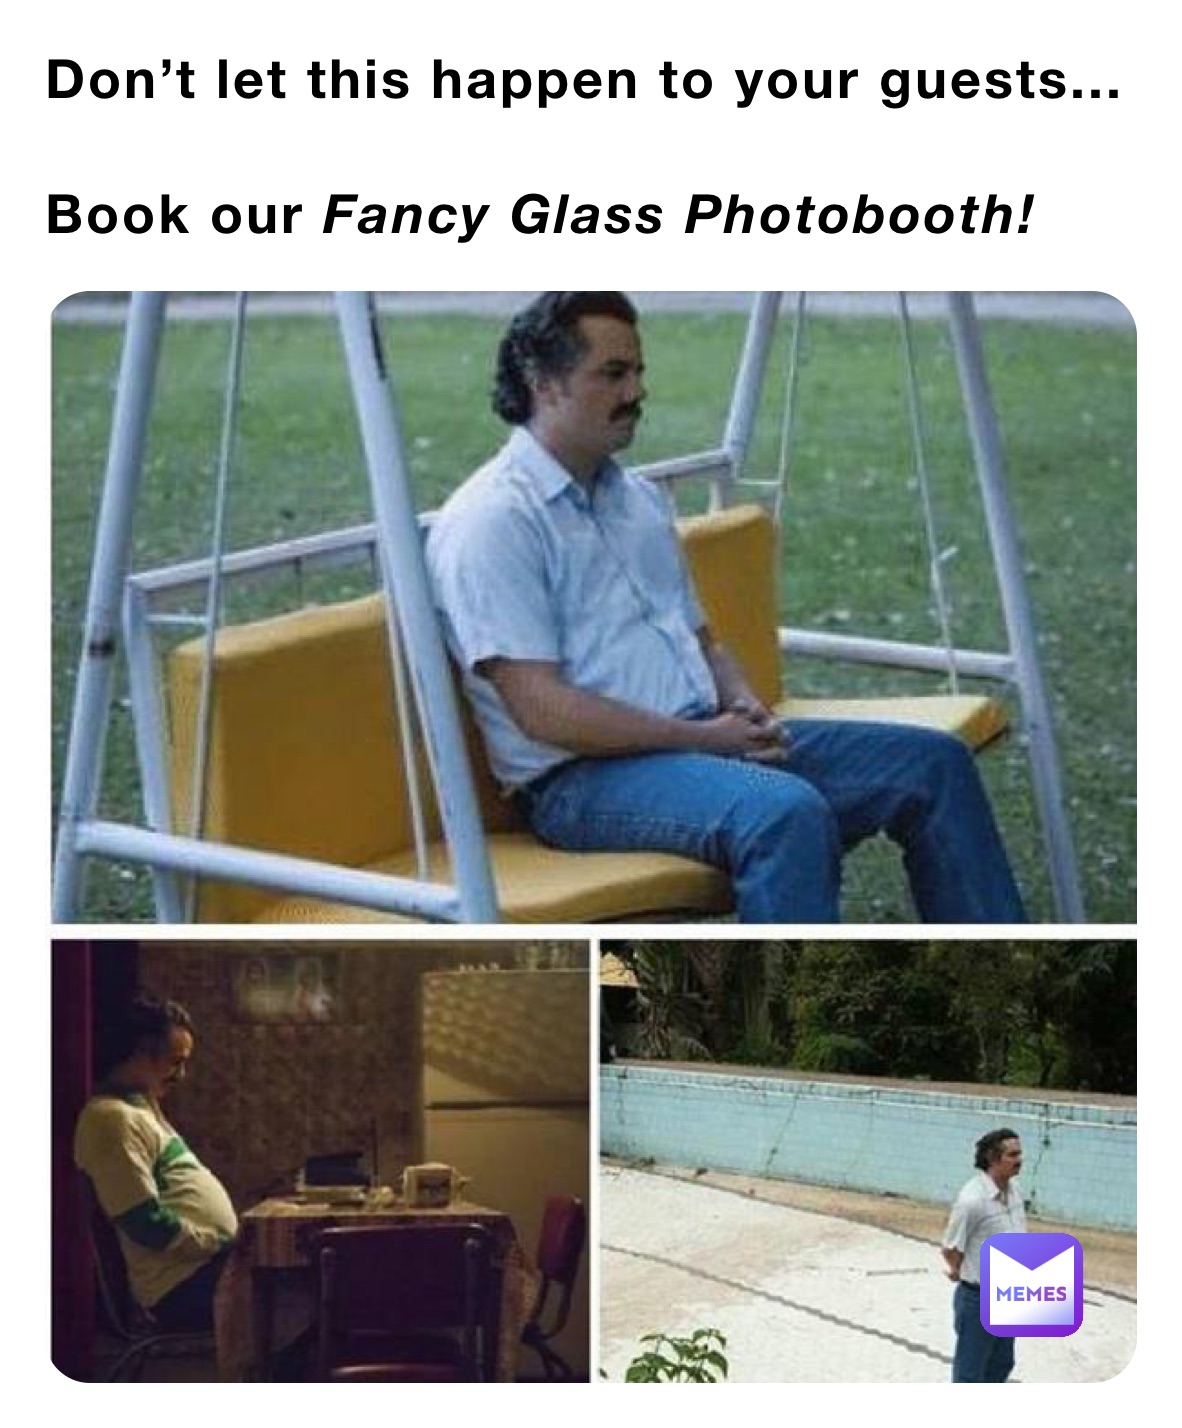 Don’t let this happen to your guests...
 
Book our Fancy Glass Photobooth! 